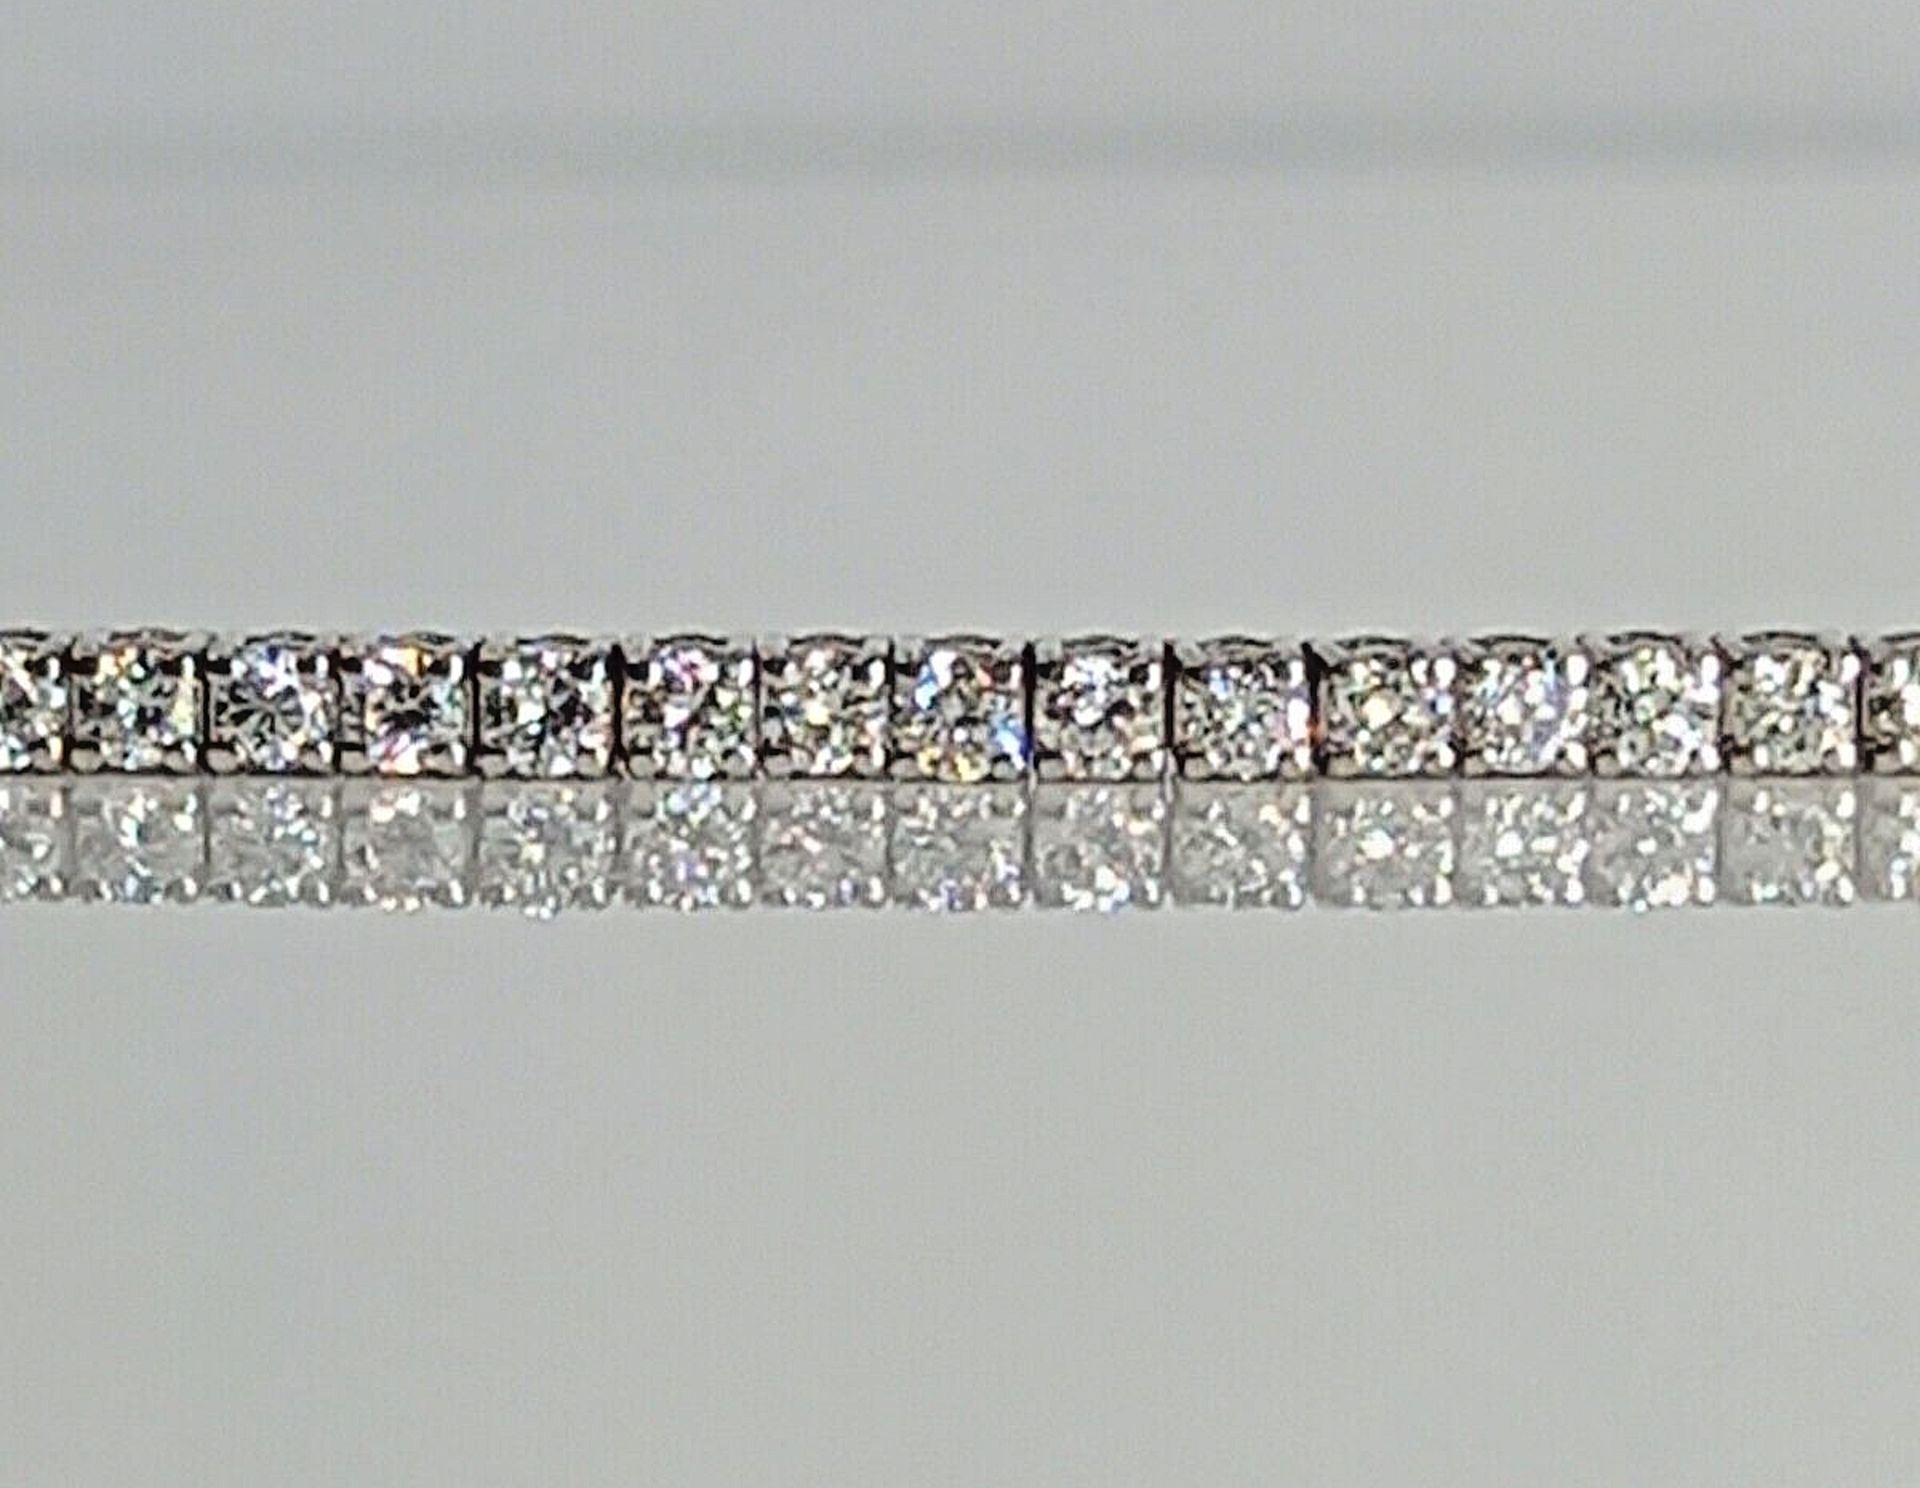 1.84 DIAMOND TENNIS BRACELET 18CT WHITE GOLD IN GIFT BOX WITH VALUATION CERTIFICATE OF £4,995 - Image 3 of 4